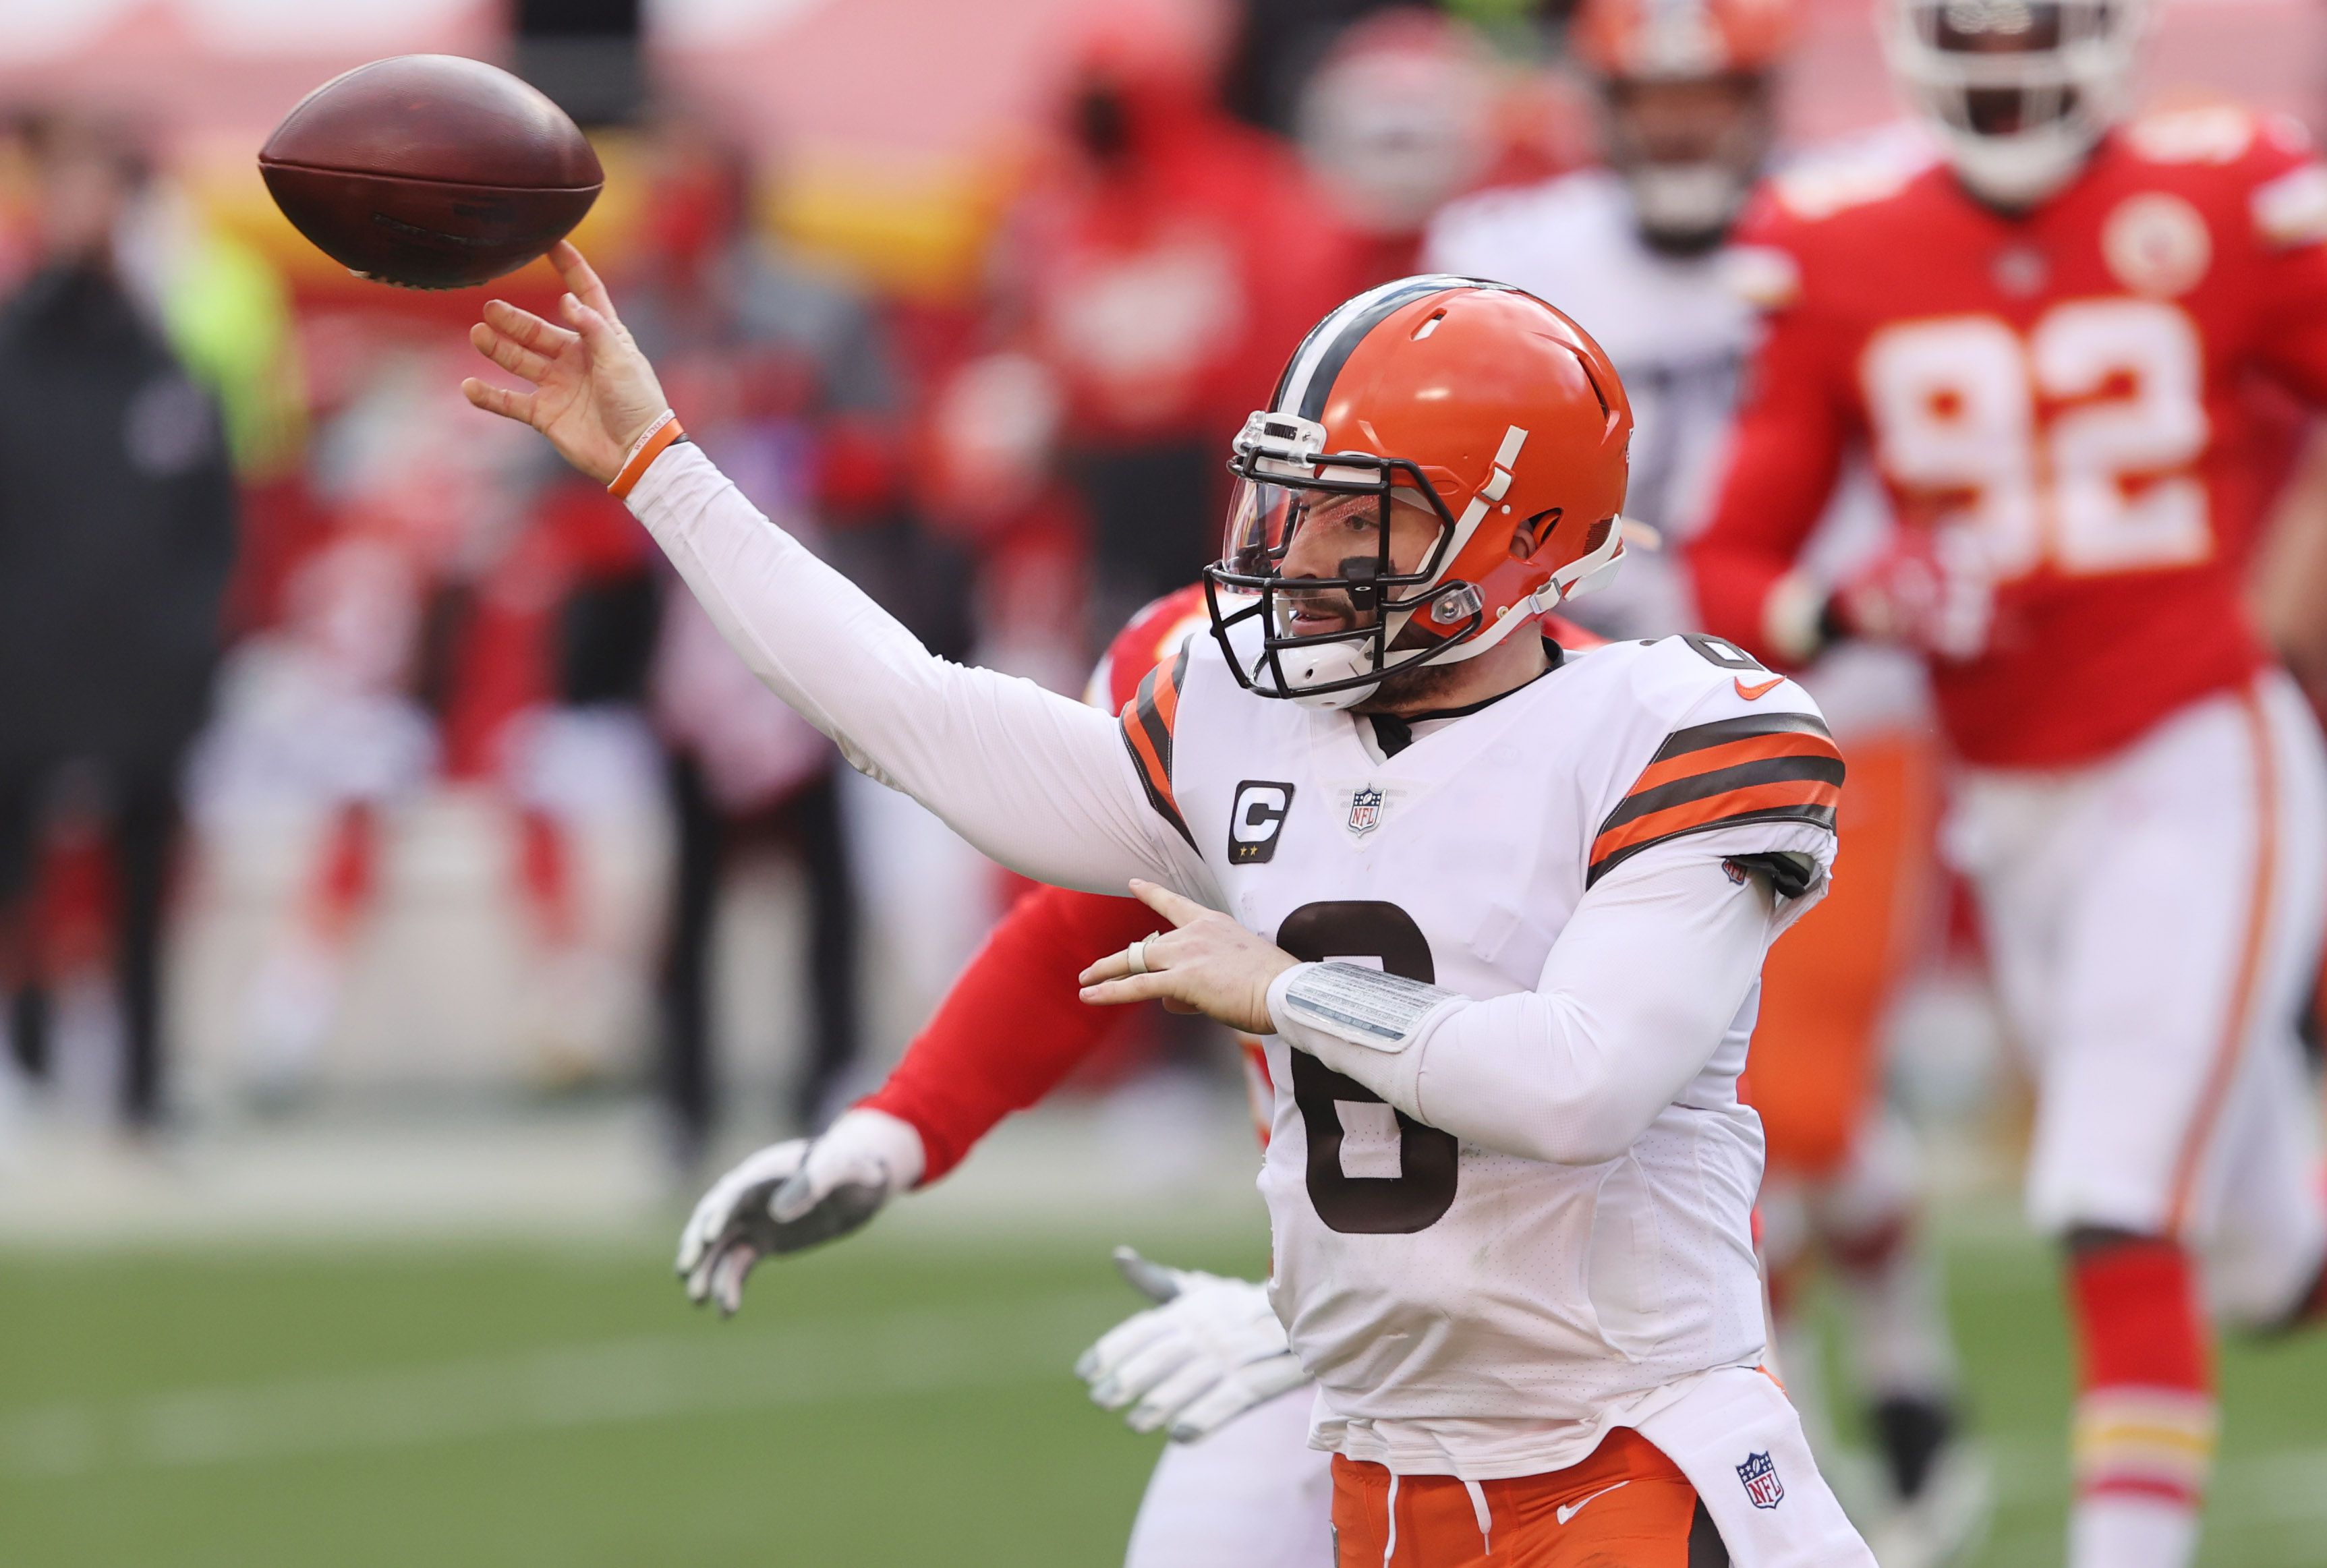 Now Is The Time For The Browns To Strike A Deal With Baker Mayfield Crain S Cleveland Business